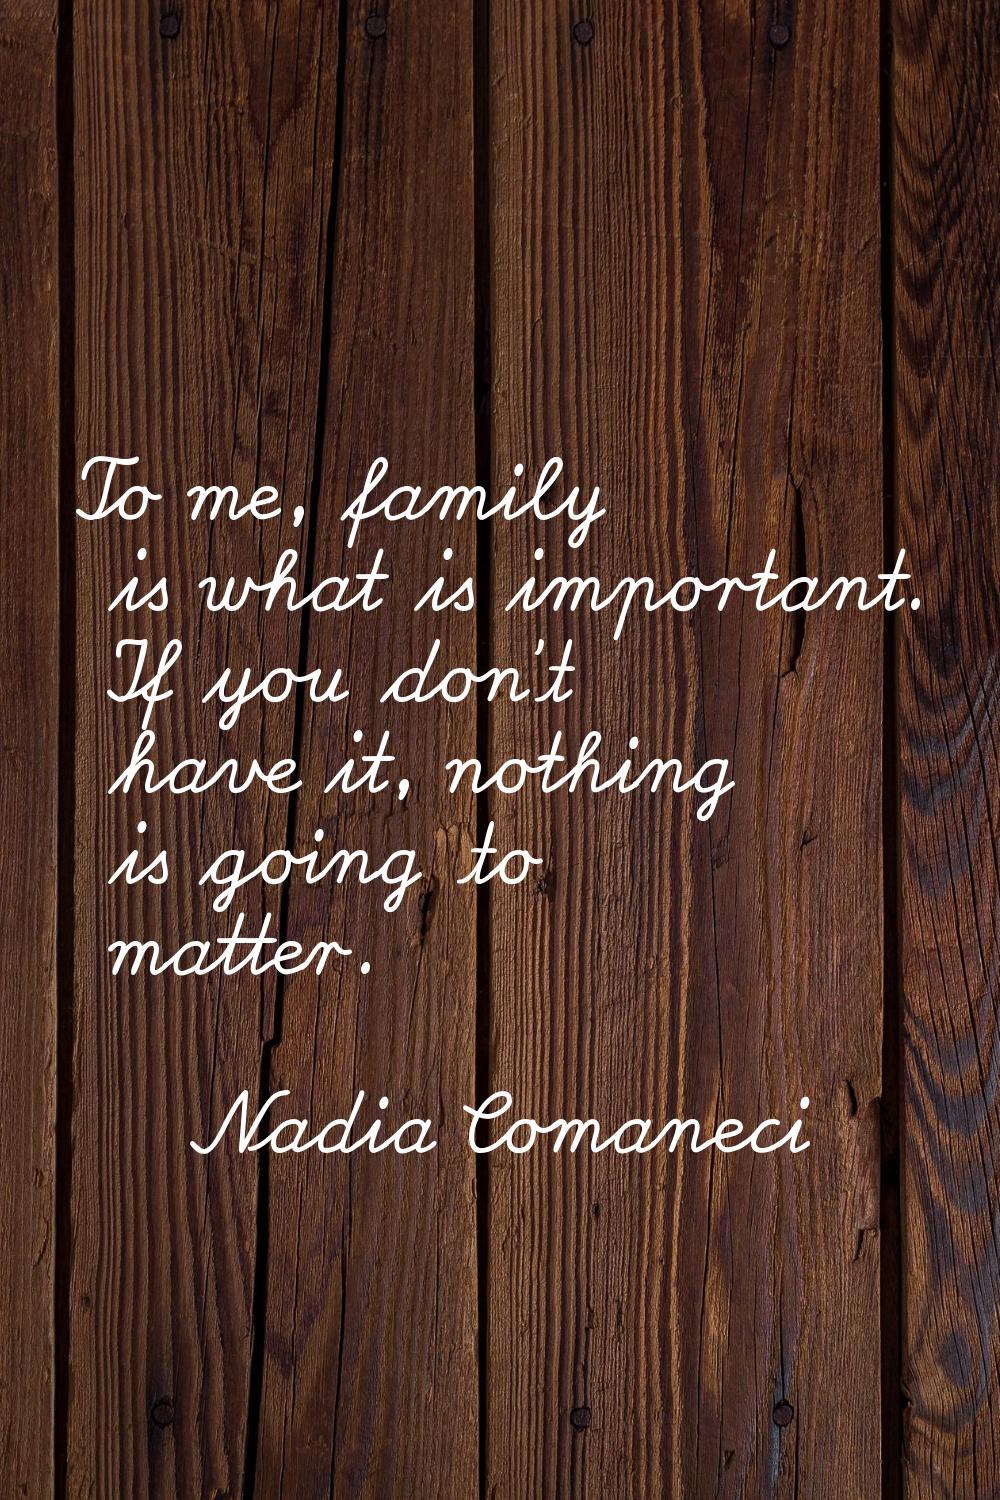 To me, family is what is important. If you don't have it, nothing is going to matter.